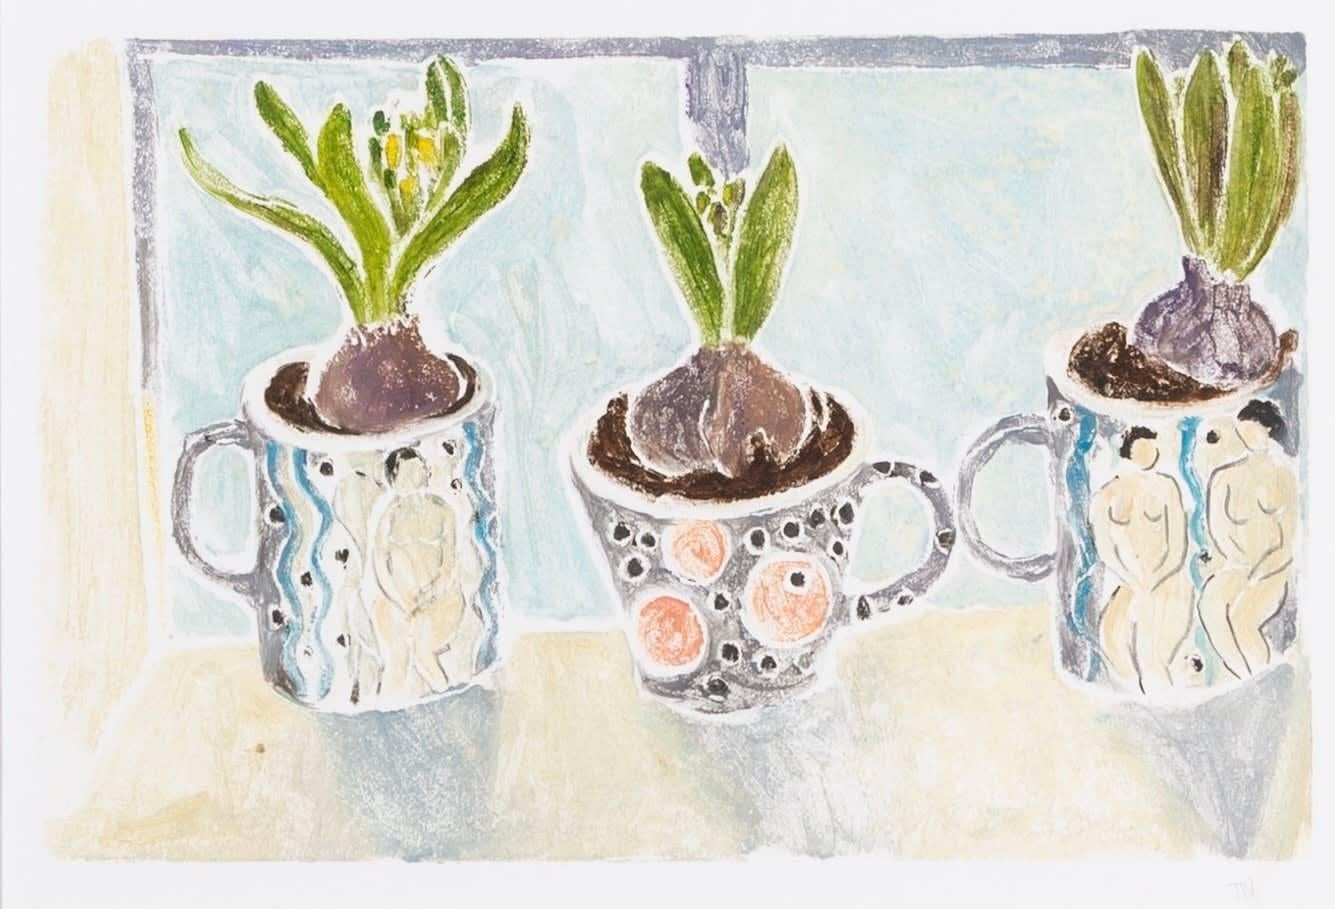 Untitled (Hyacinth Bulbs in Mugs), Styrofoam Print by Tessa Newcomb B. 1955

Additional information:
Medium: Styrofoam print with paintwork on card
Dimensions: 28.1 x 43.7 cm
11 x 17 1/4 in
Signed with initials

Born in Suffolk in 1955, Tessa